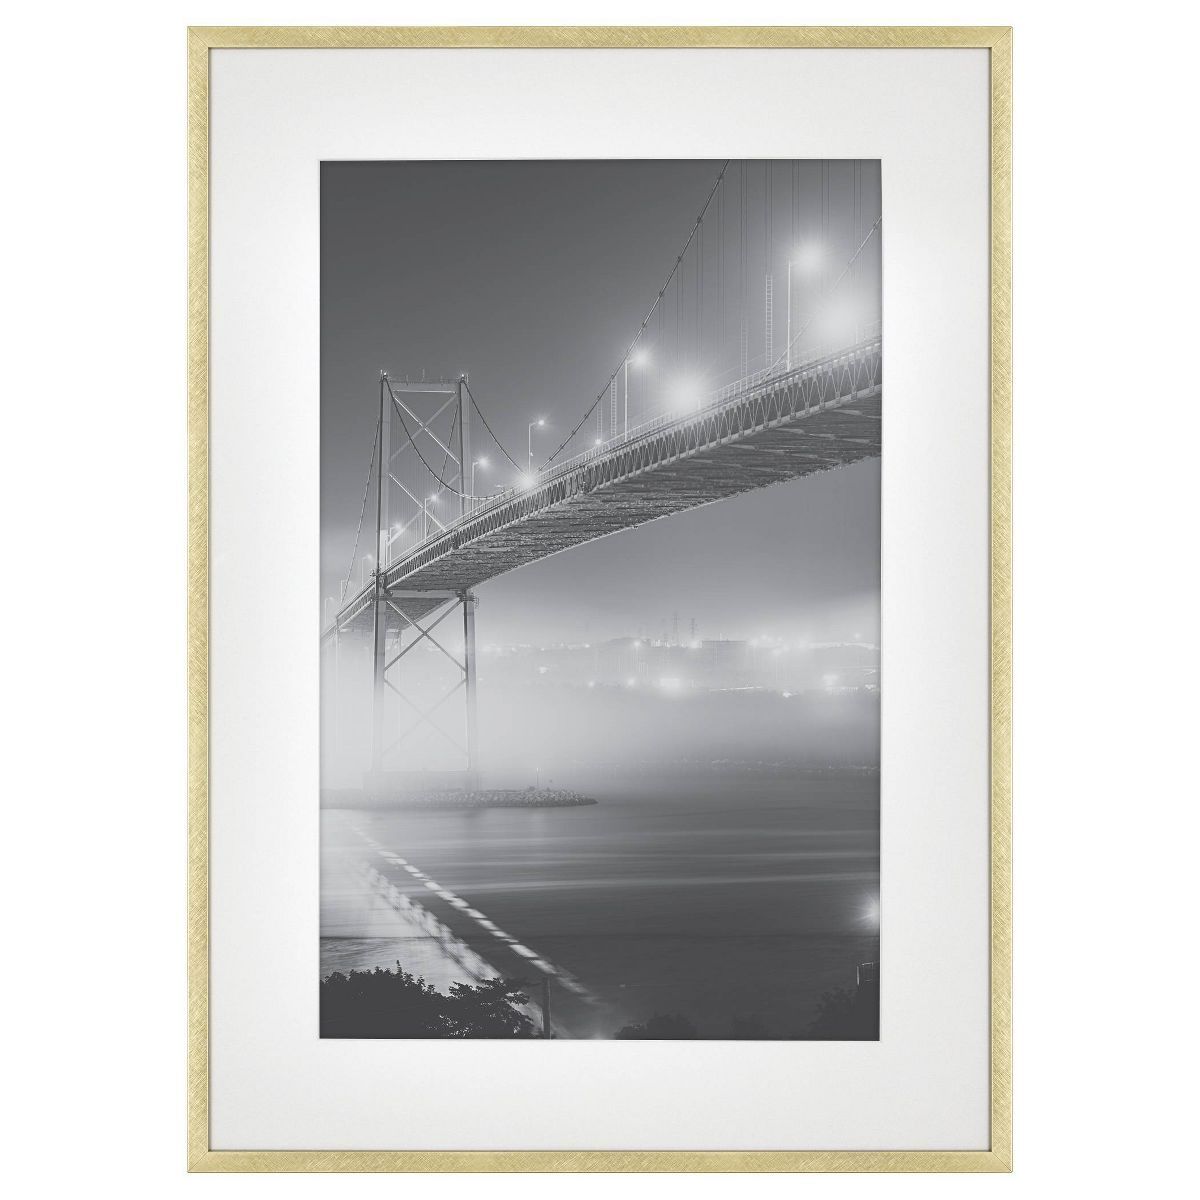 Thin Metal Matted Gallery Frame Gold - Threshold™ | Target